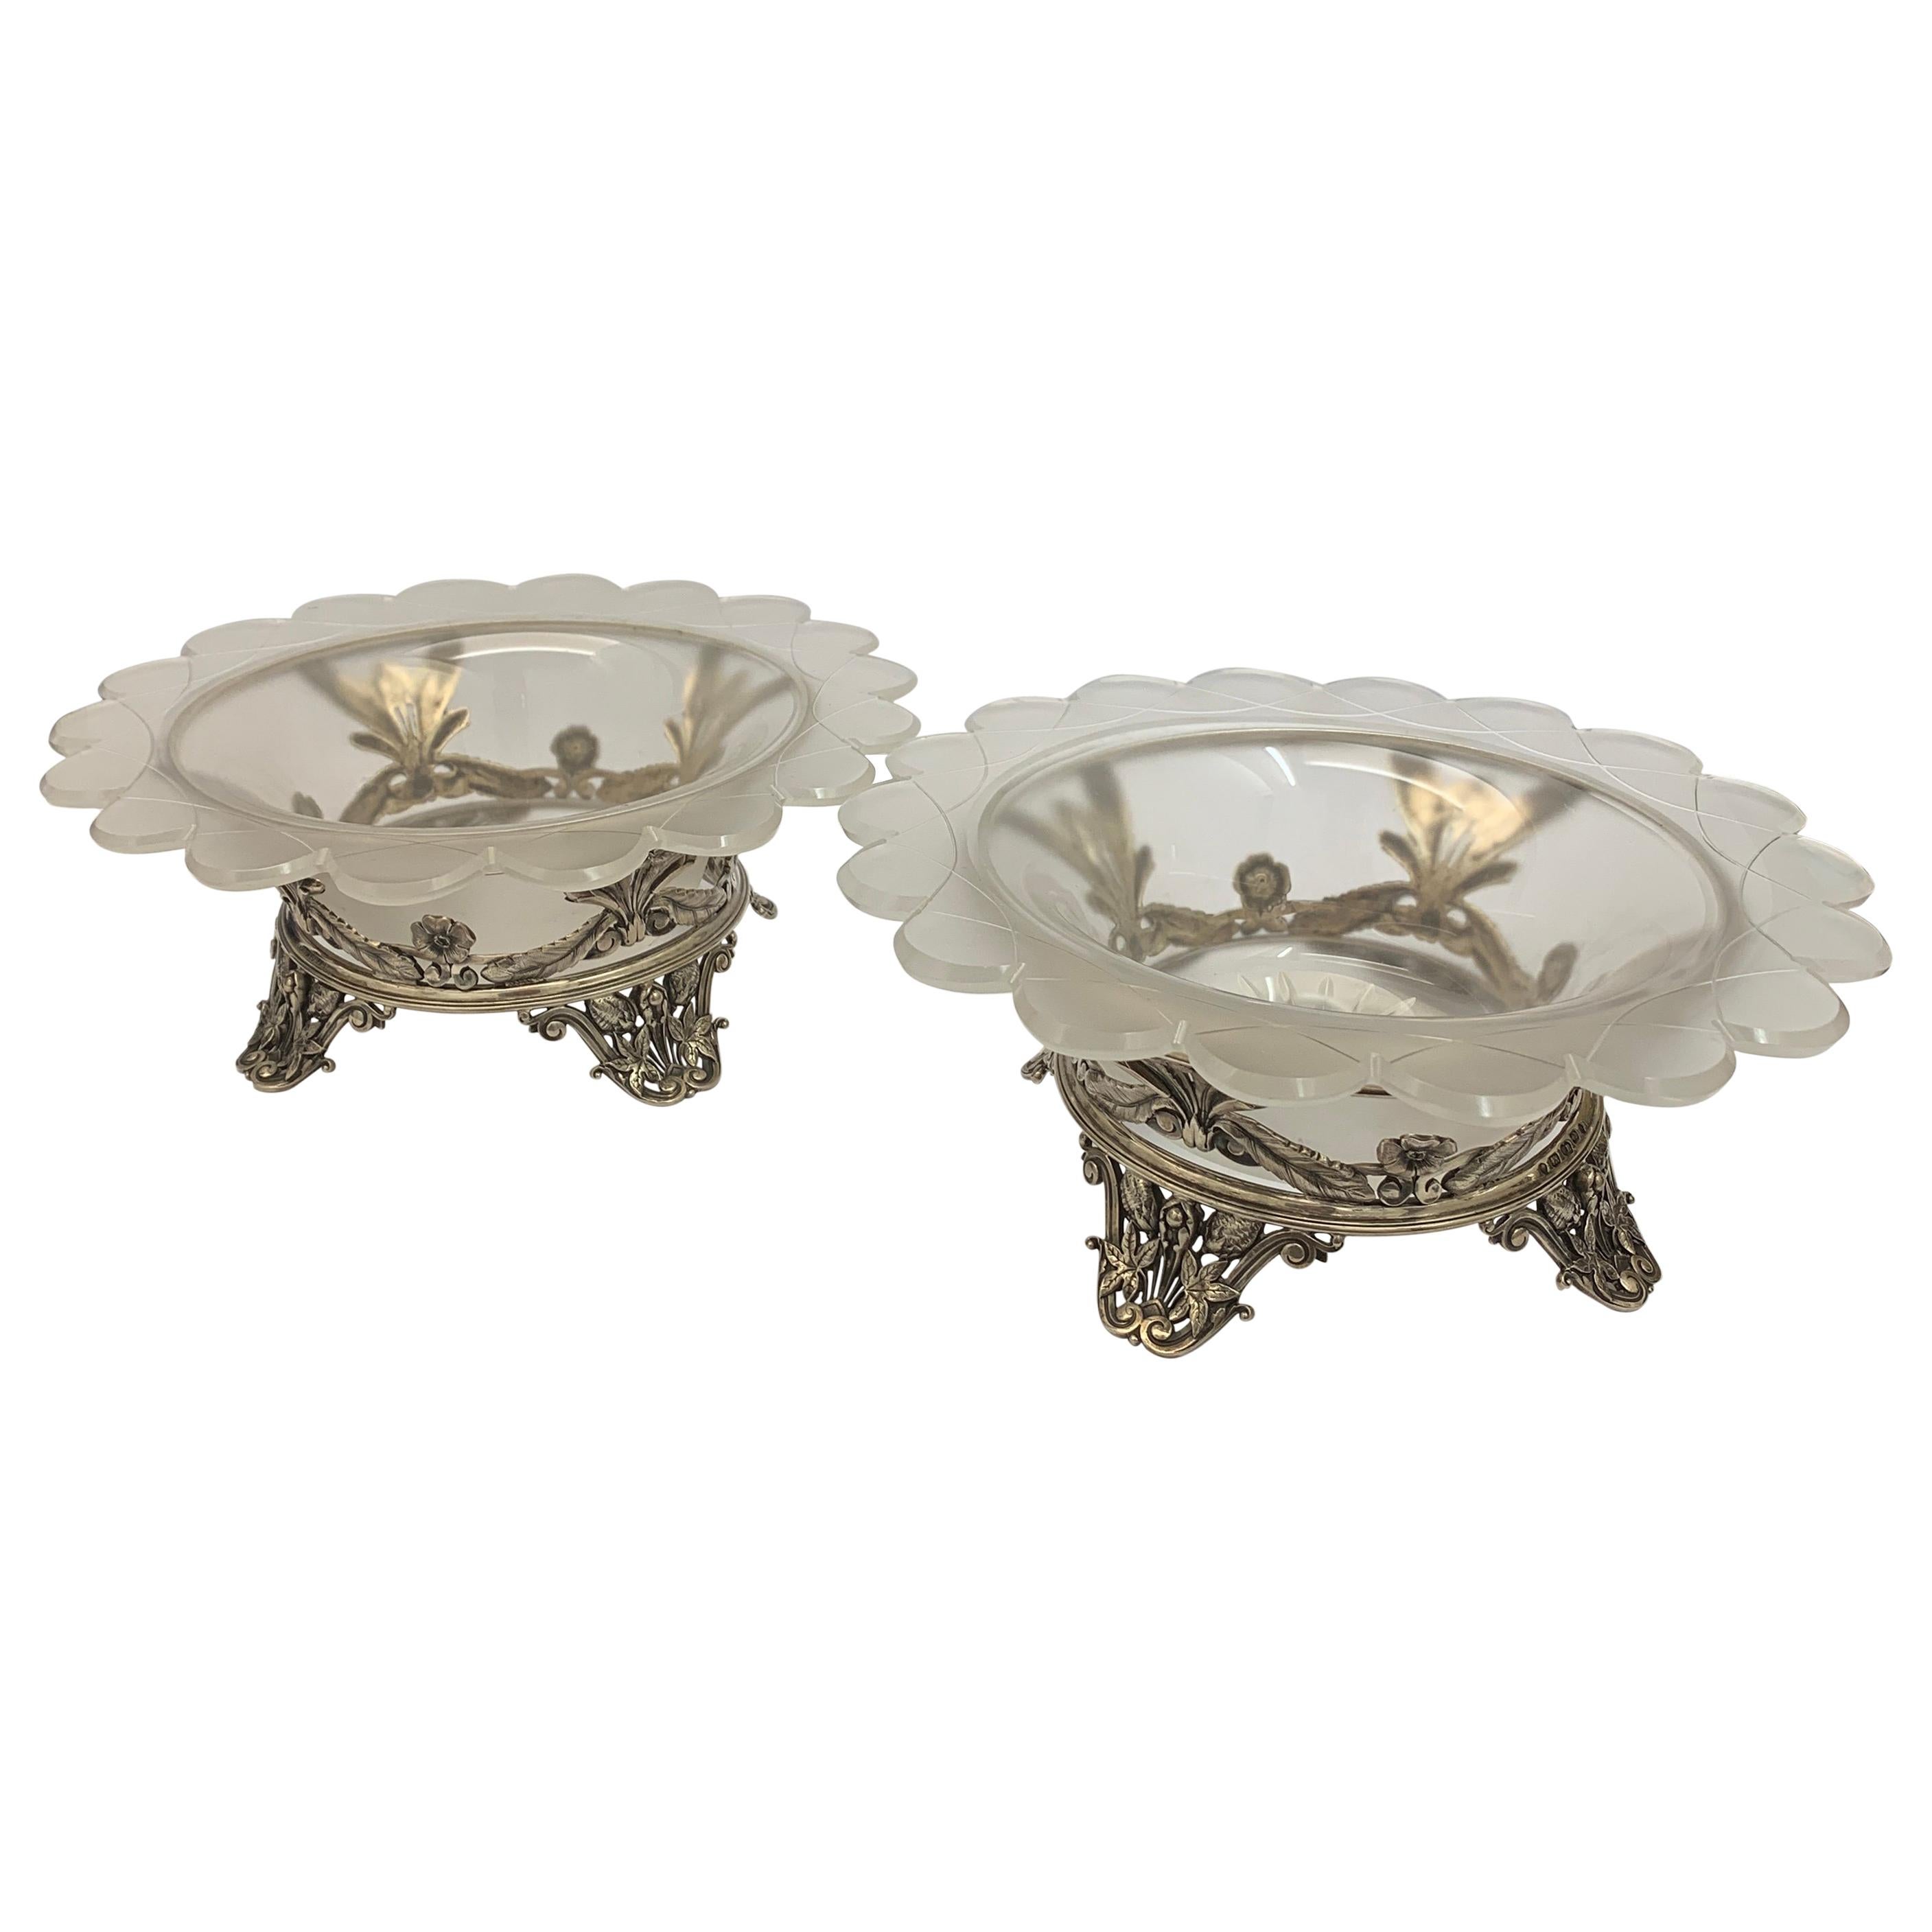 Pair of Antique Silver and Frosted Glass Decorative Compotes, 19th Century For Sale